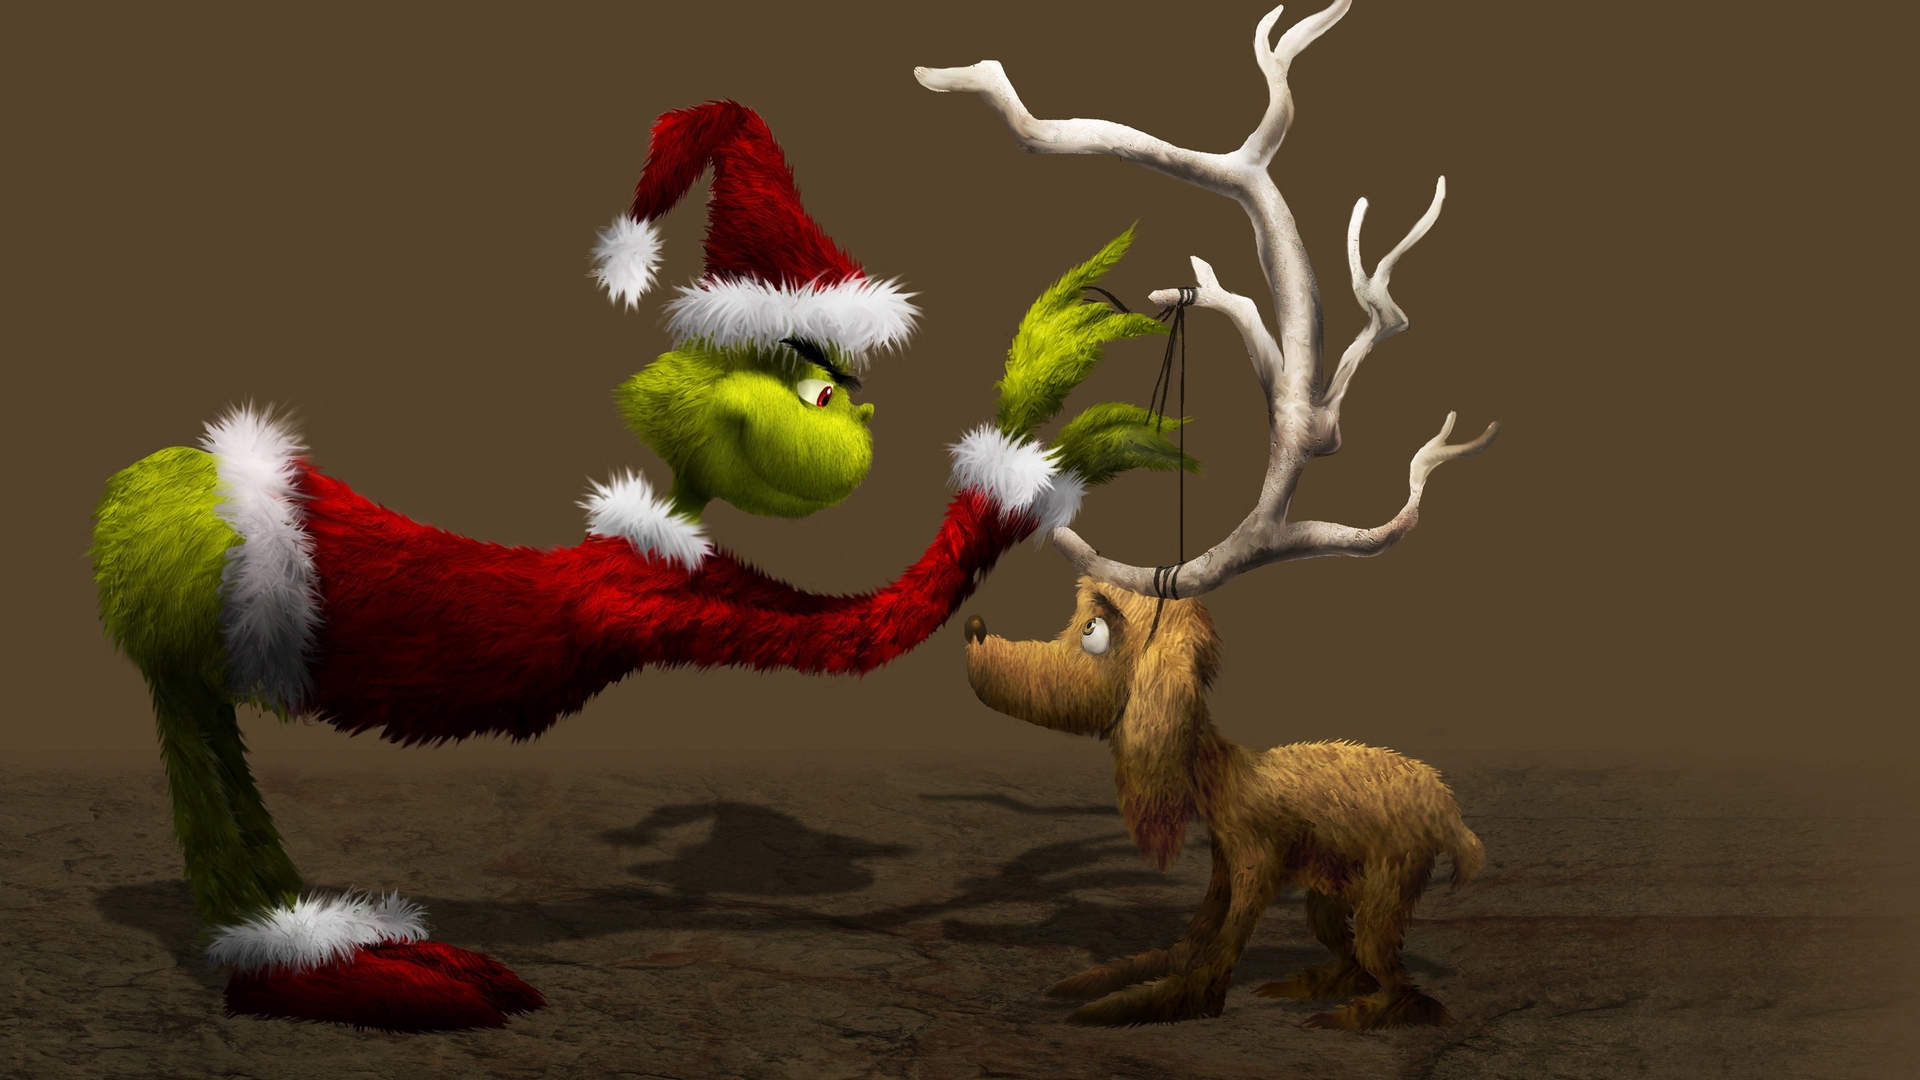 Search Results For The Grinch Cartoon Calendar